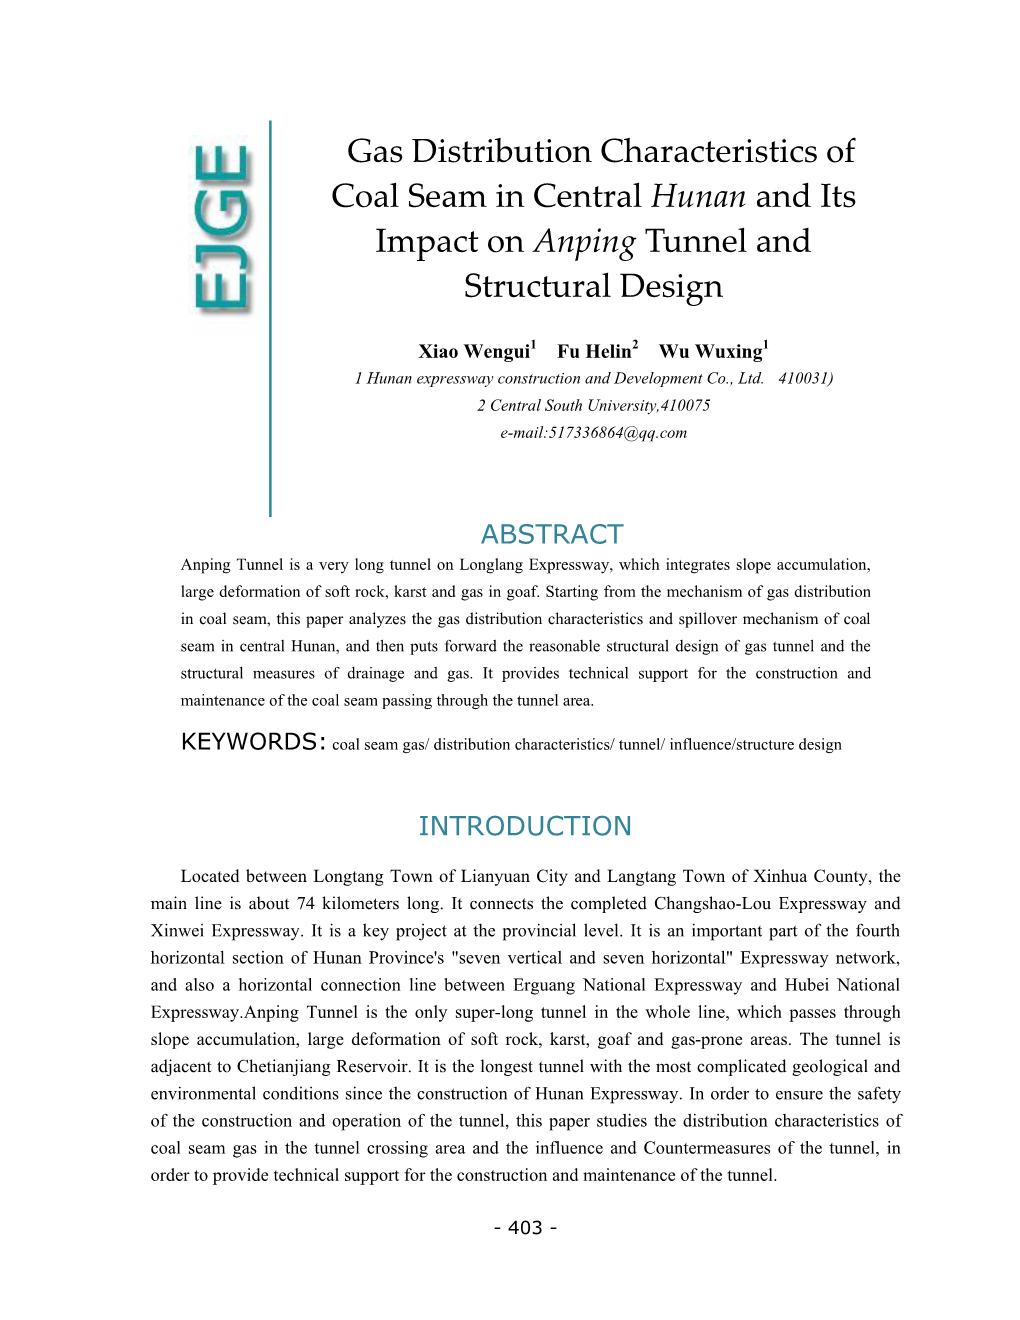 Gas Distribution Characteristics of Coal Seam in Central Hunan and Its Impact on Anping Tunnel and Structural Design